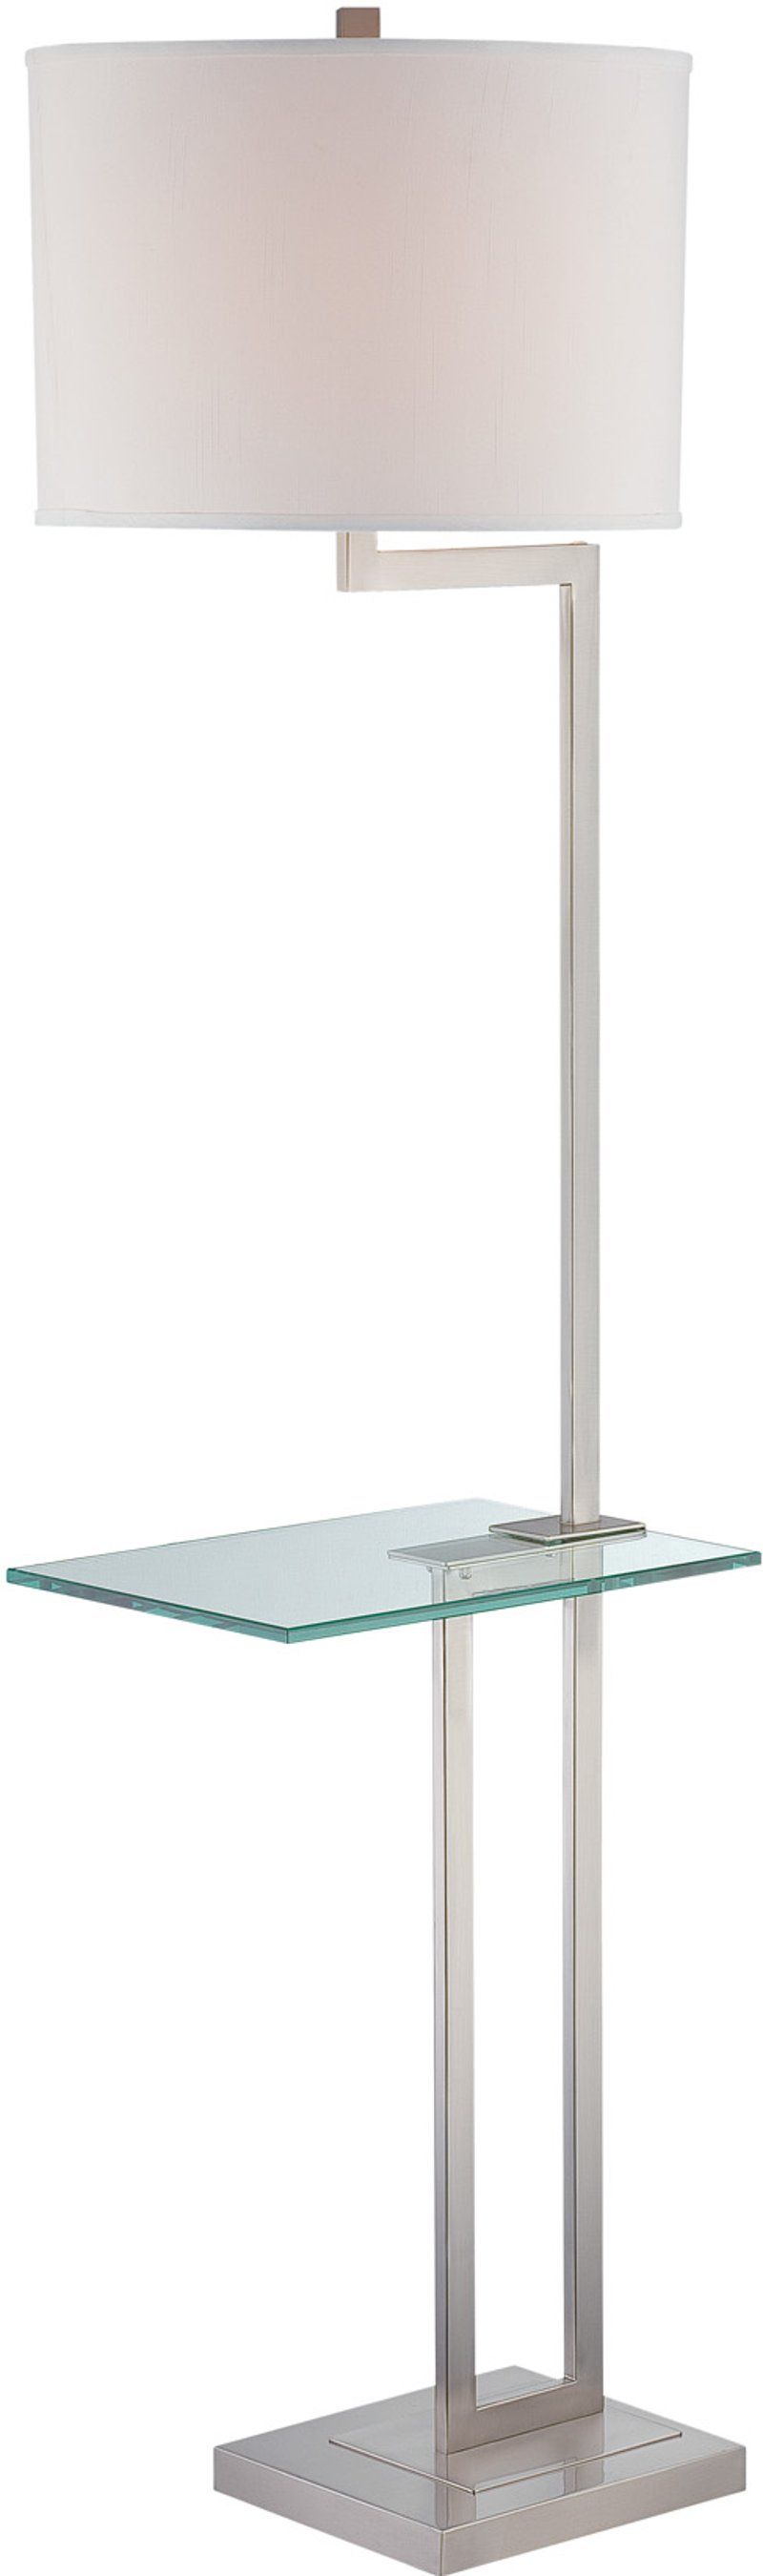 Floor Table Lamp With Glass Tray, Floor Lamp With Tray Table Uk